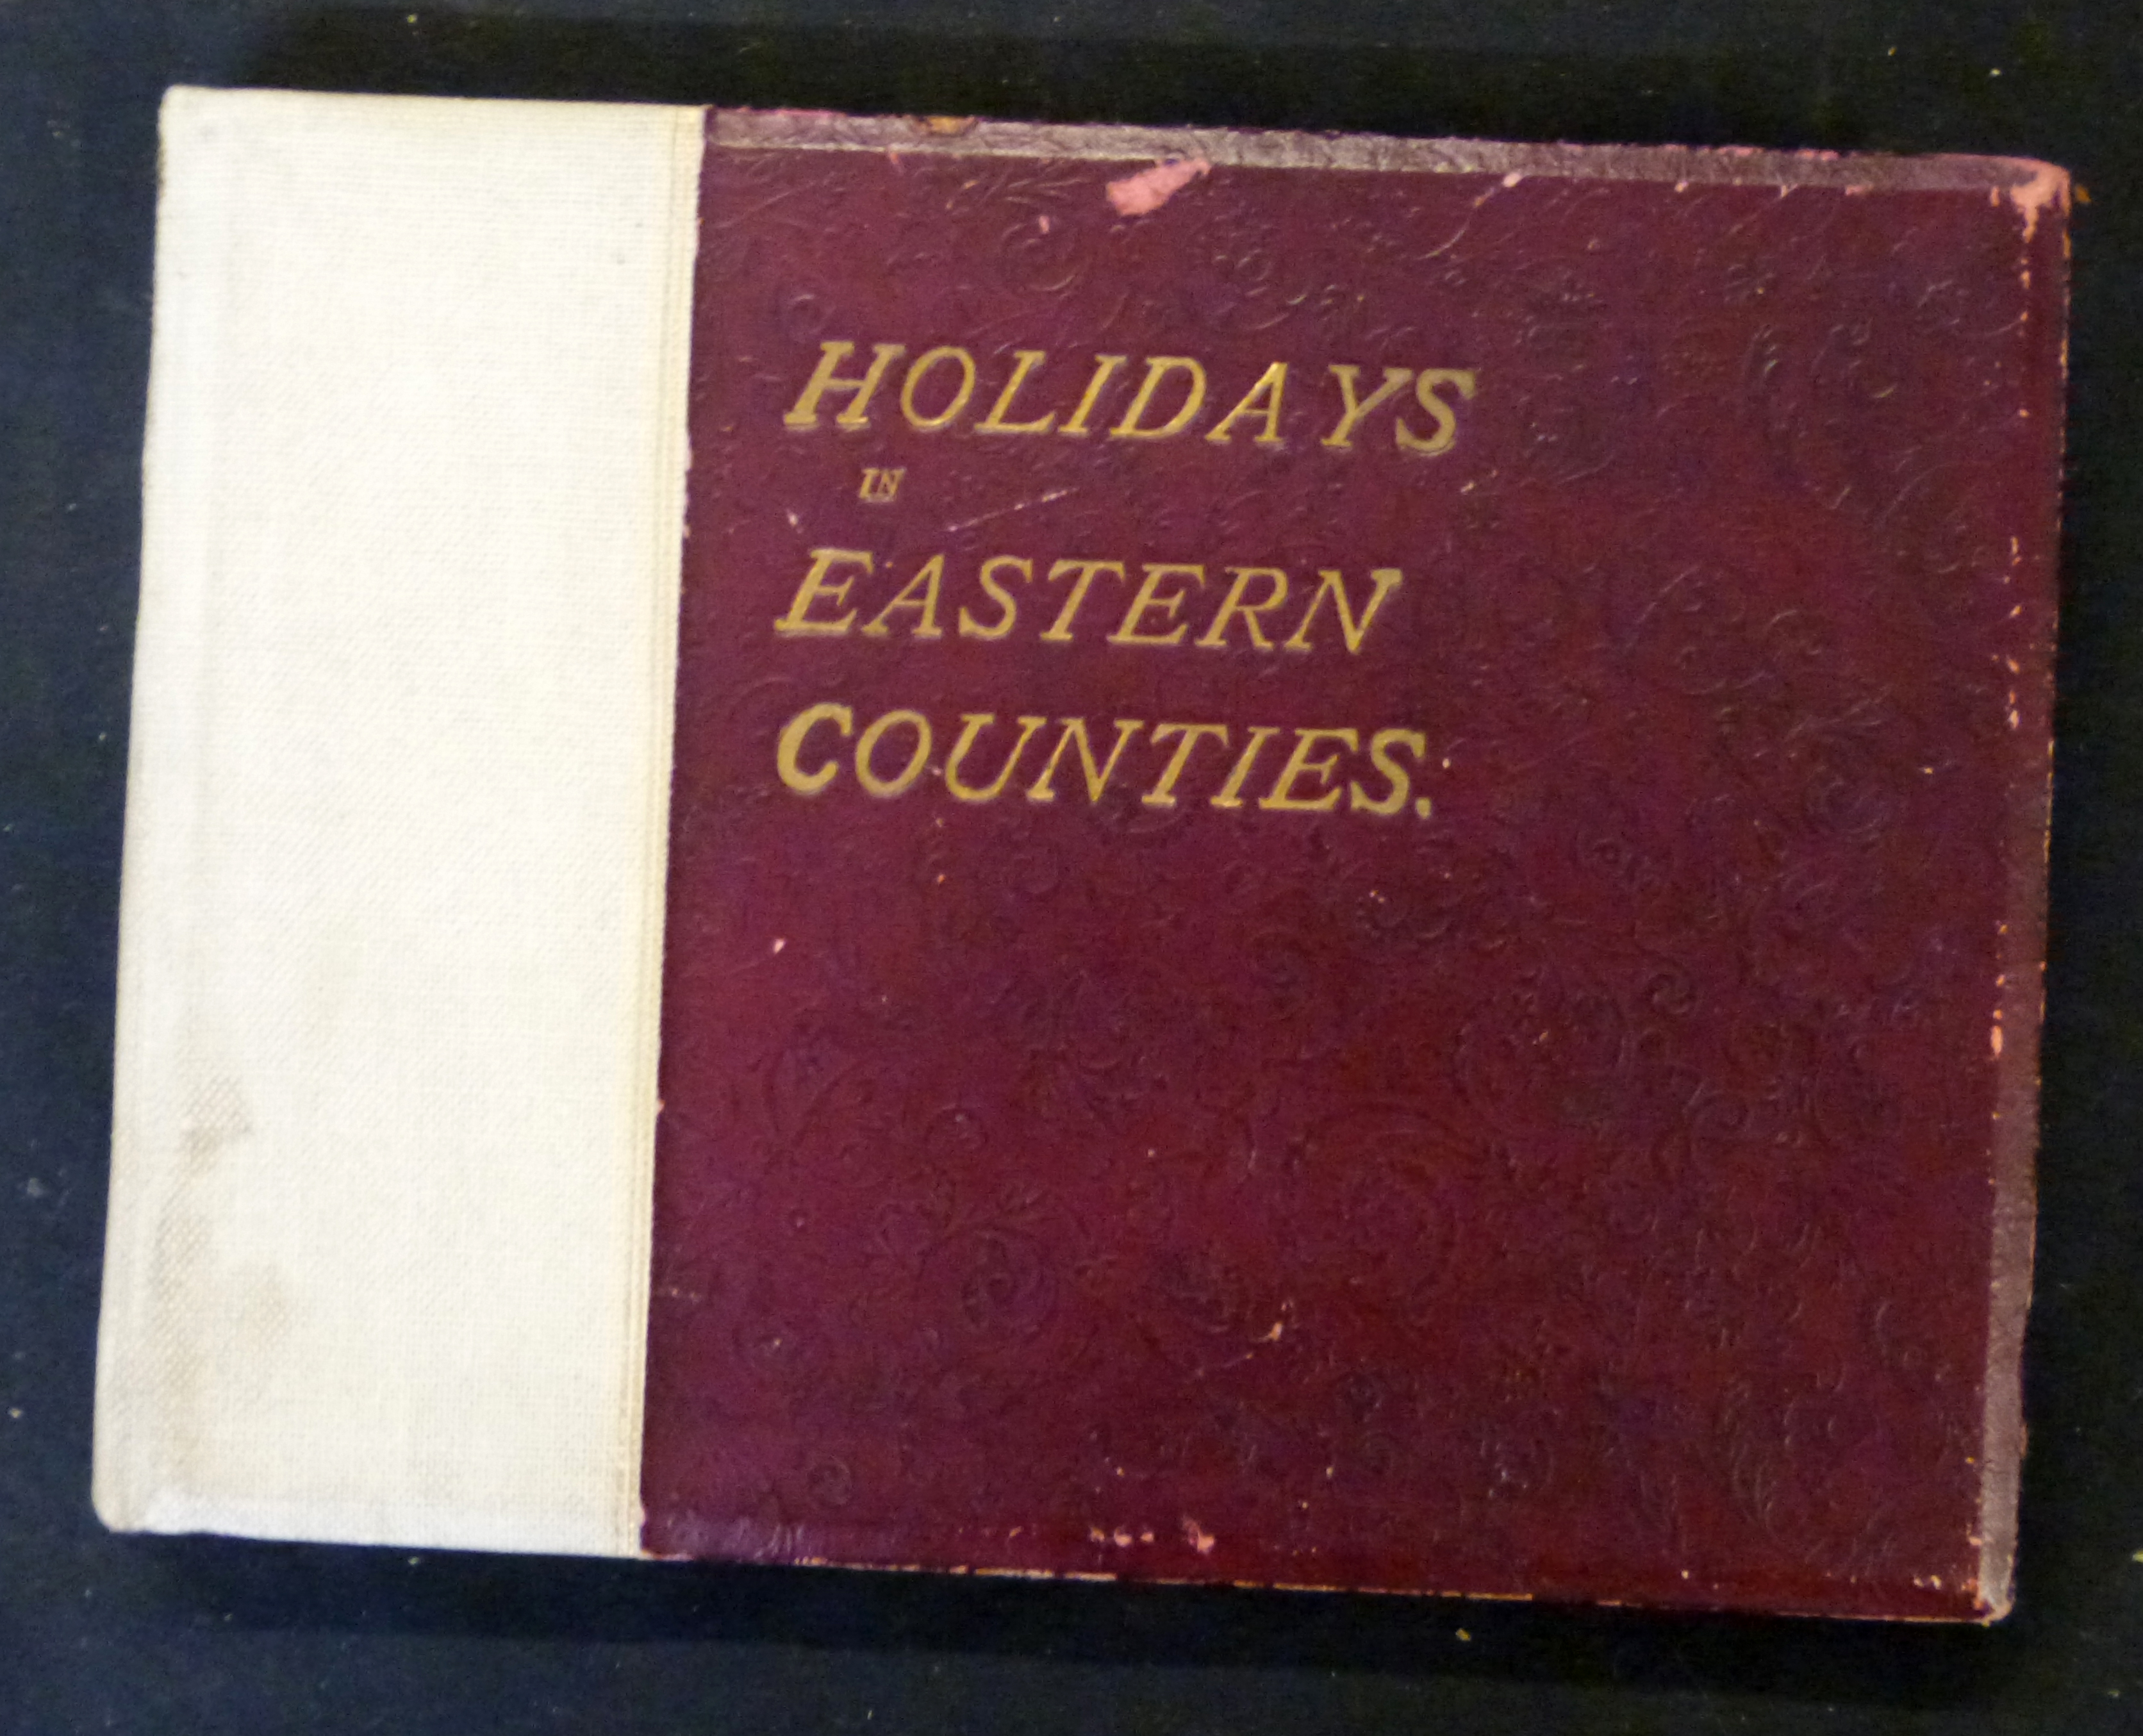 PERCY LINDLEY (ED): HOLIDAYS IN EASTERN COUNTIES, London and New York, [1905], oblong, original